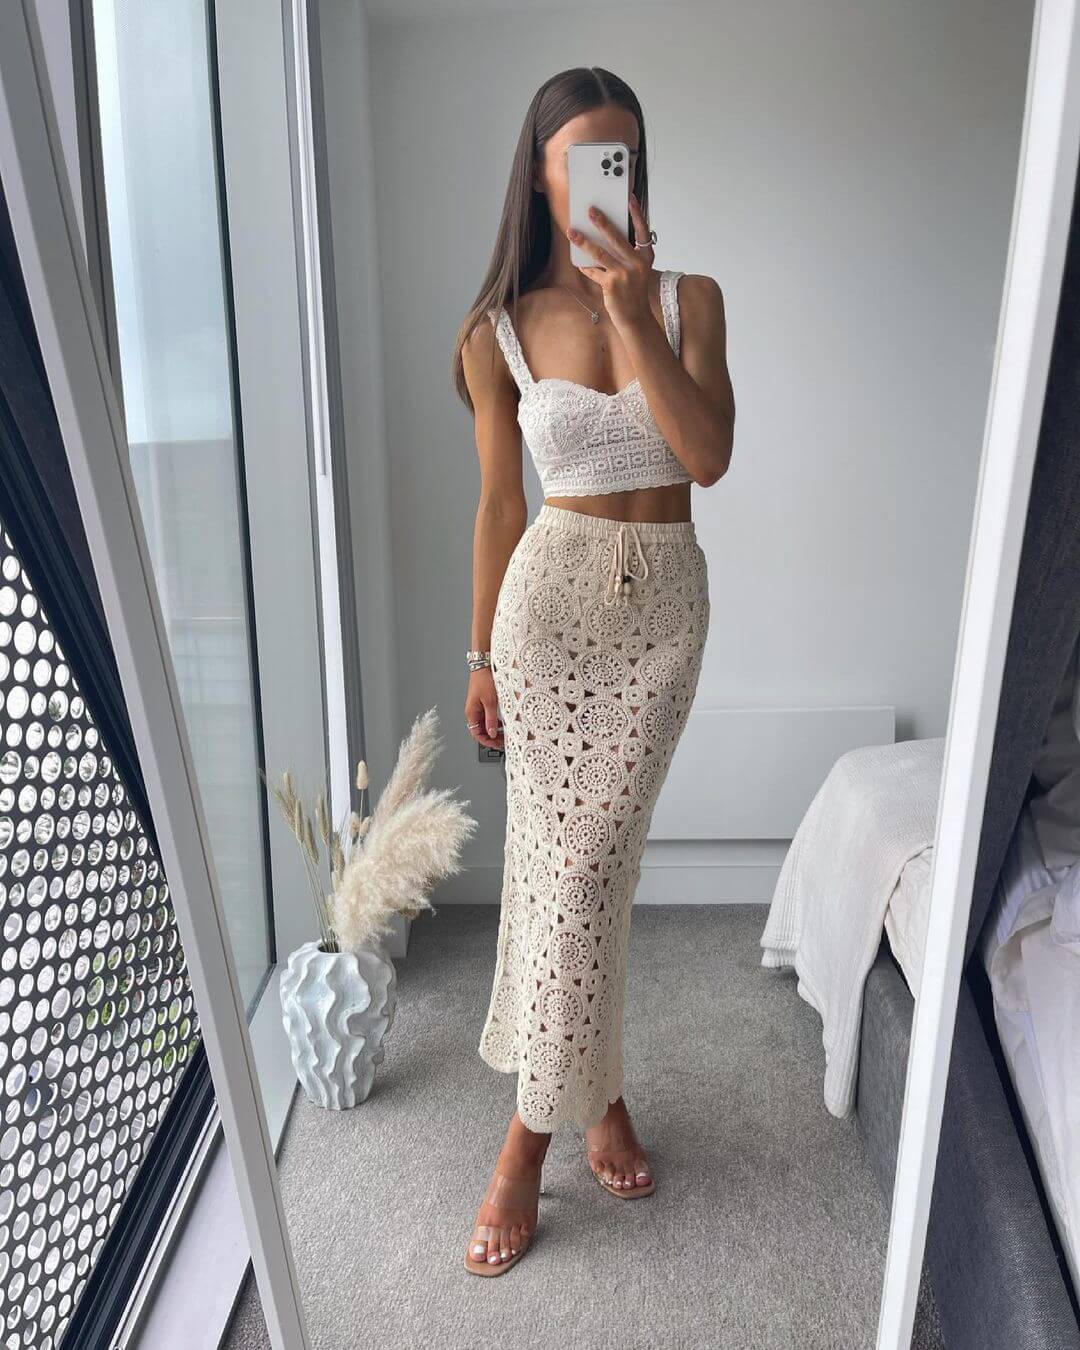 This Crochet Outfit Is The Ultimate Summer Getaway Look